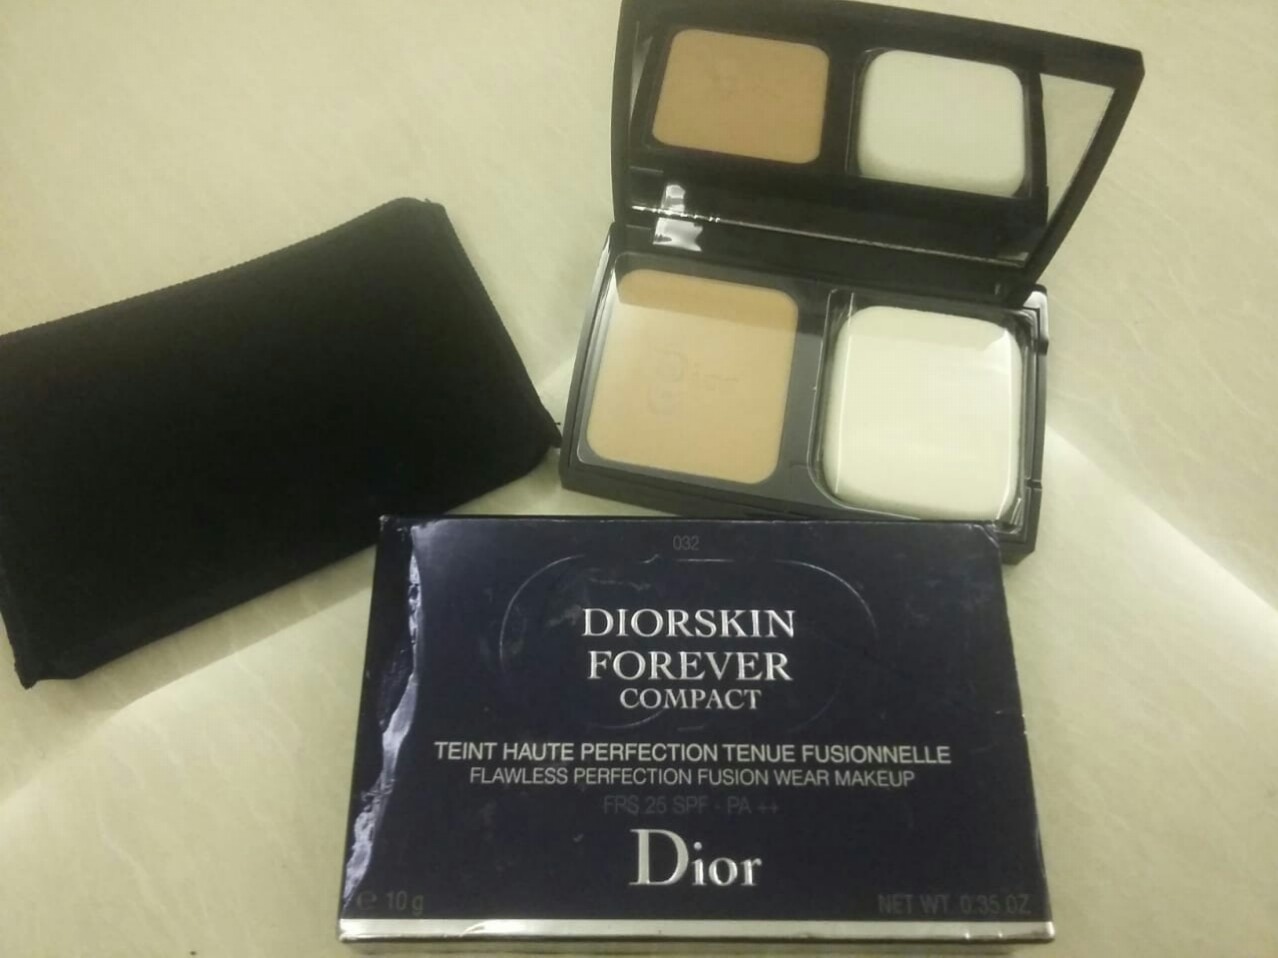 Dior diorskin forever compact warna 032 